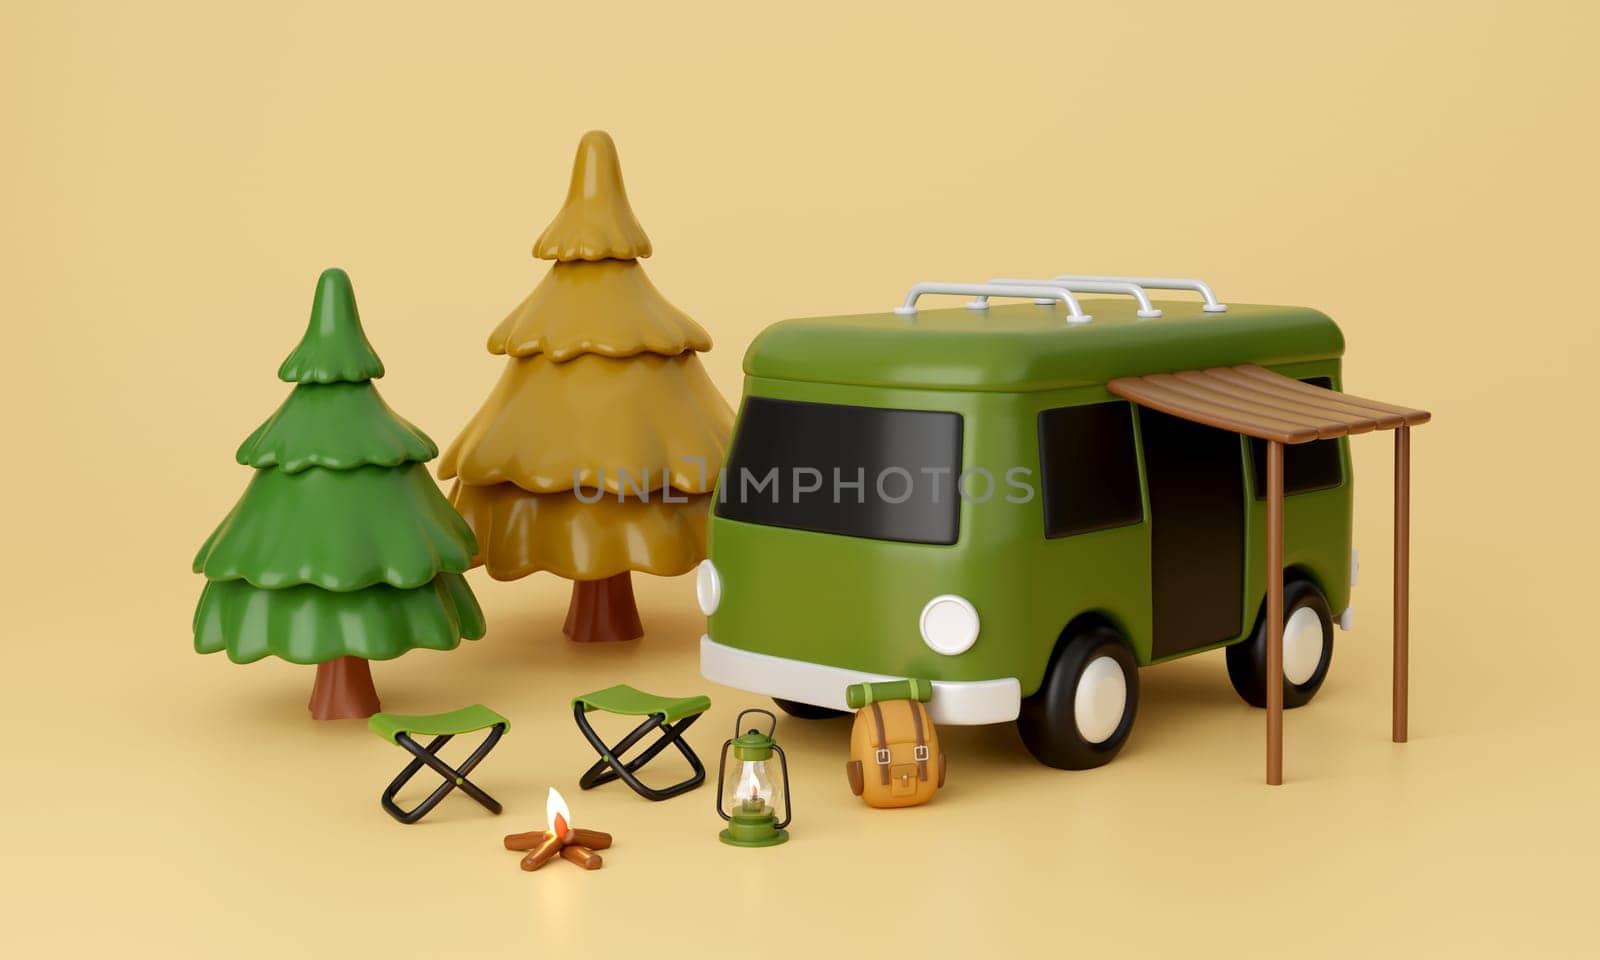 3d Camp van and elements for camping, camp fire, trip, hiking. Concept. 3d rendering illustration..